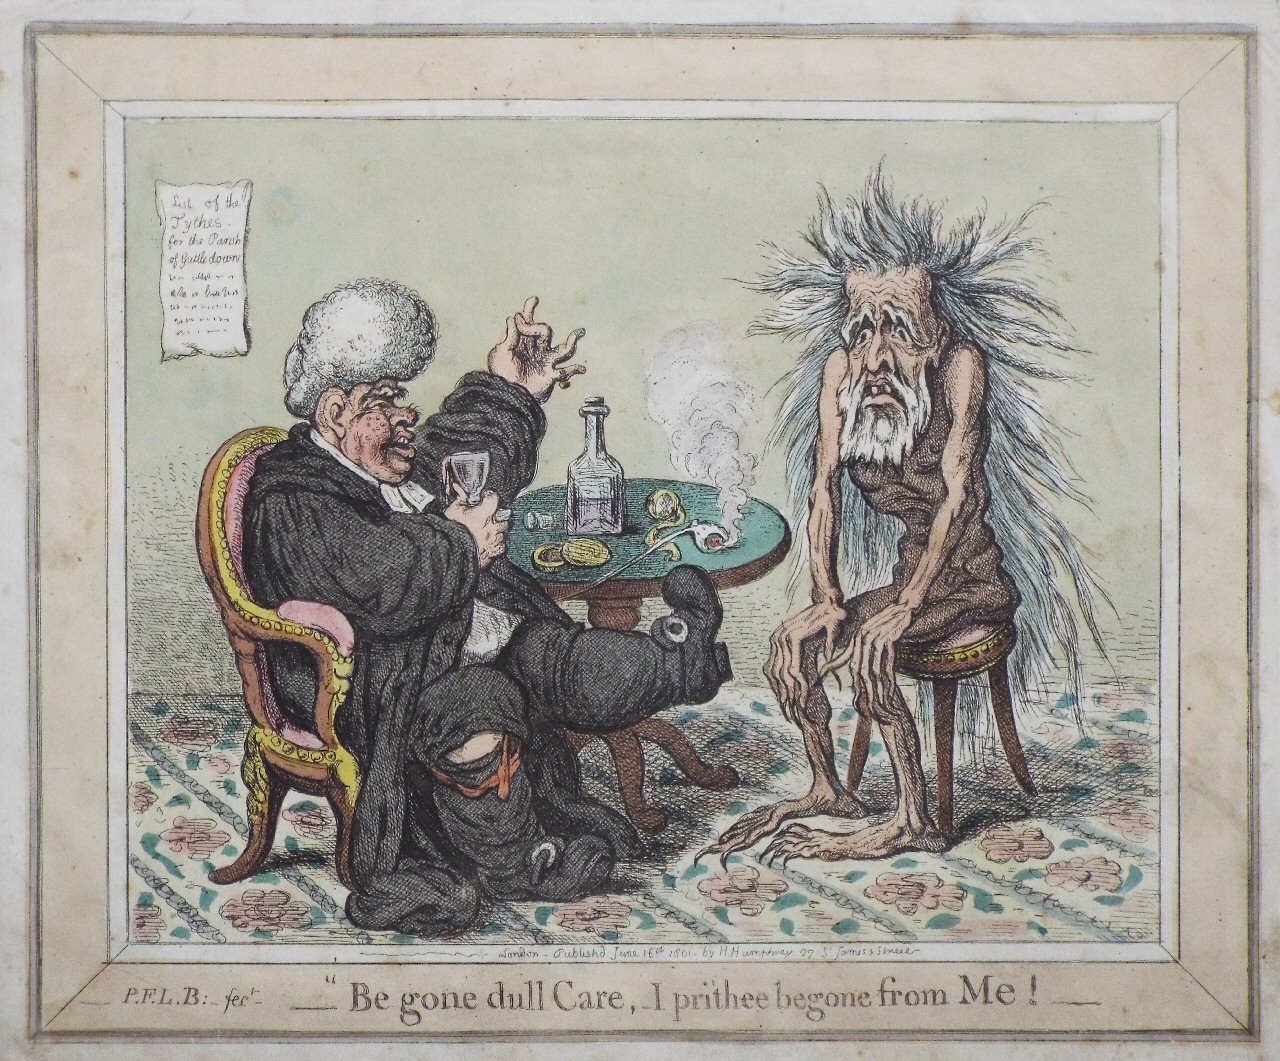 Etching - Be gone dull Care, I prithee begone from Me ! - Gillray